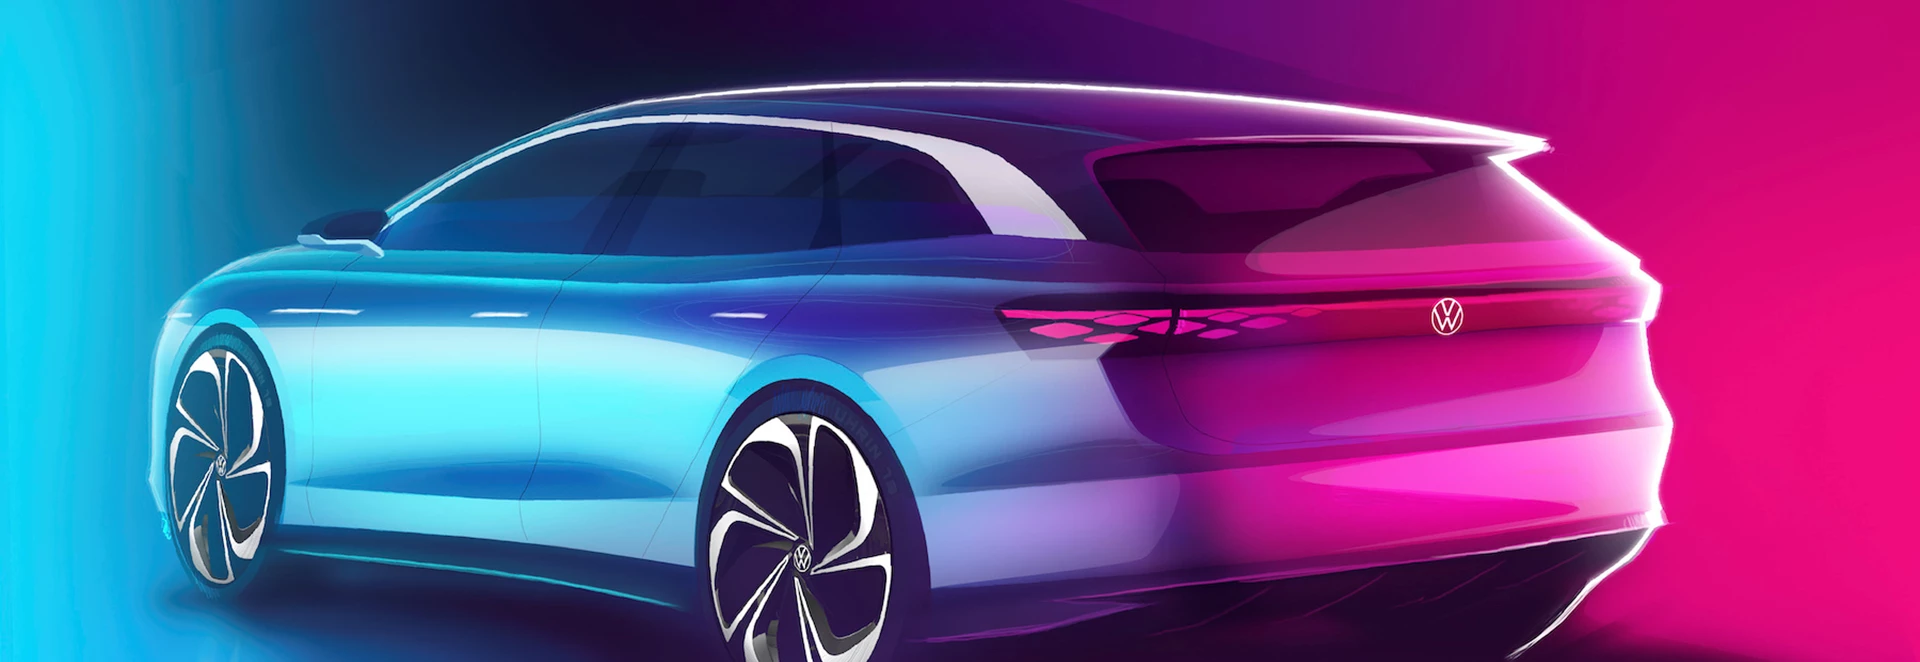 Volkswagen teases new electric estate car with concept